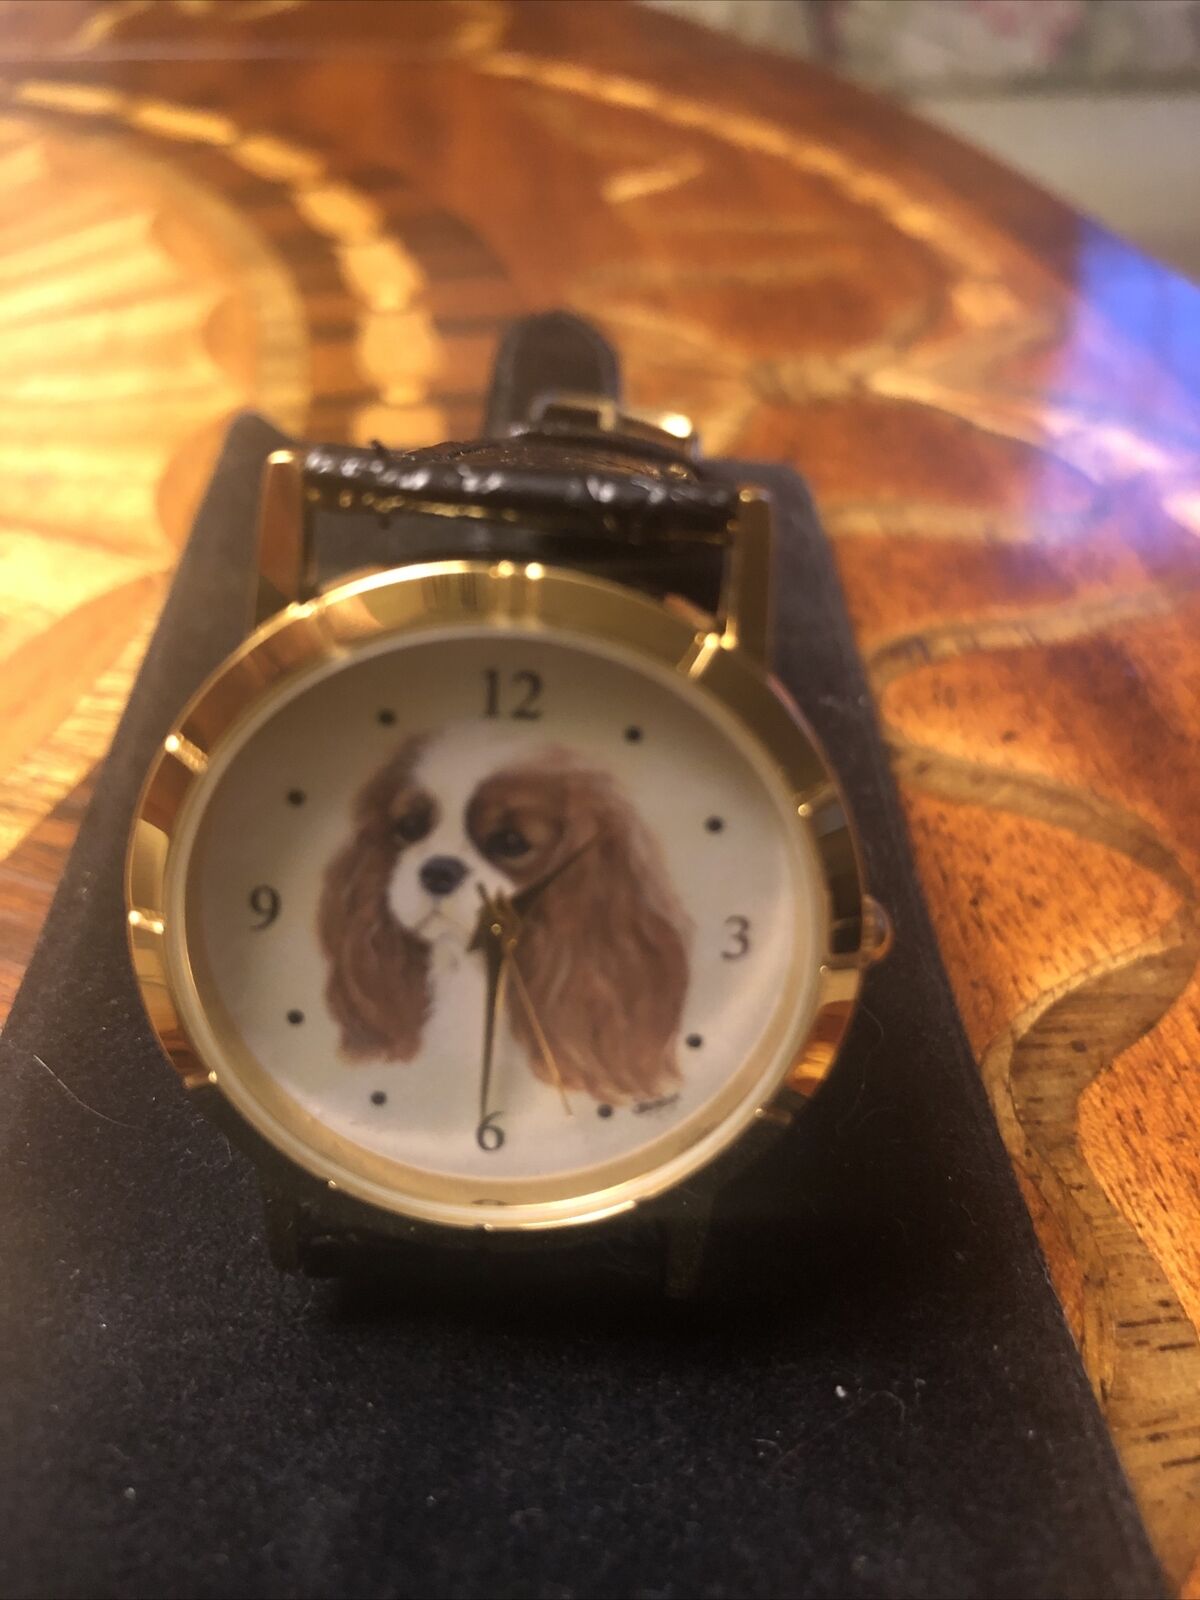 NWOT Cavalier King Charles Quartz Watch with Leather Band - Needs a Battery